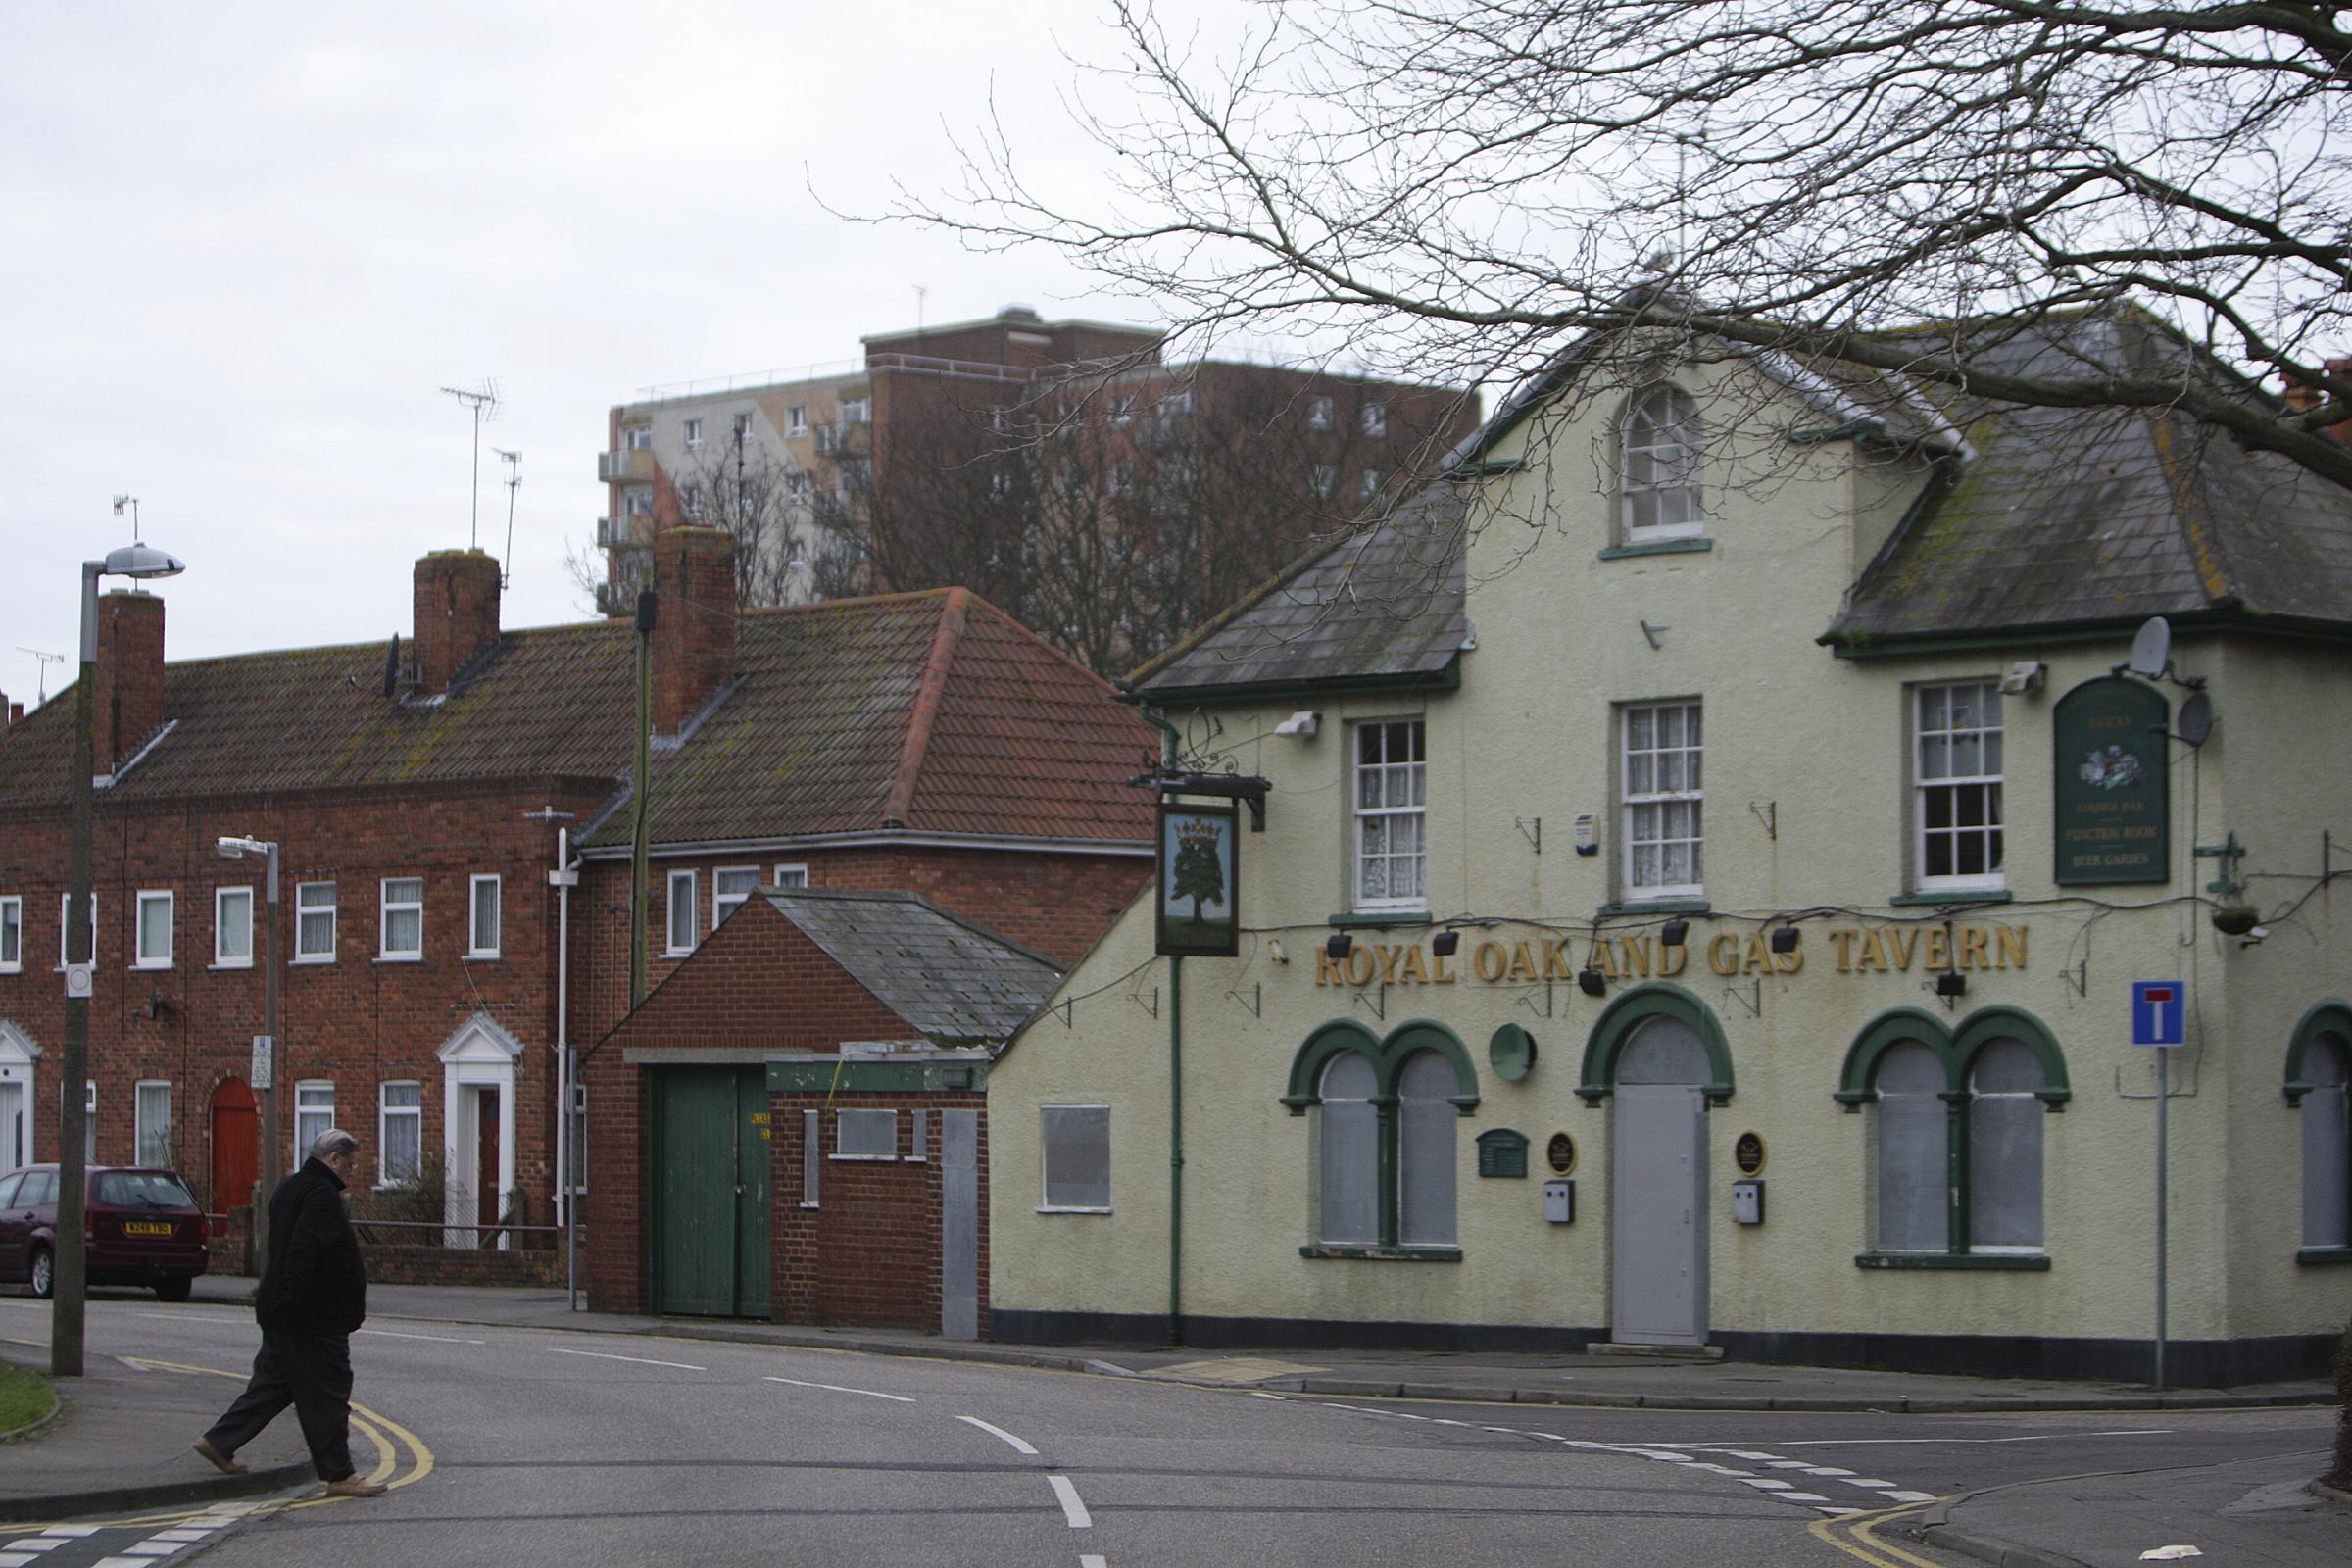 The Royal Oak and Gas Tavern in Skinner Street, Poole, 2010